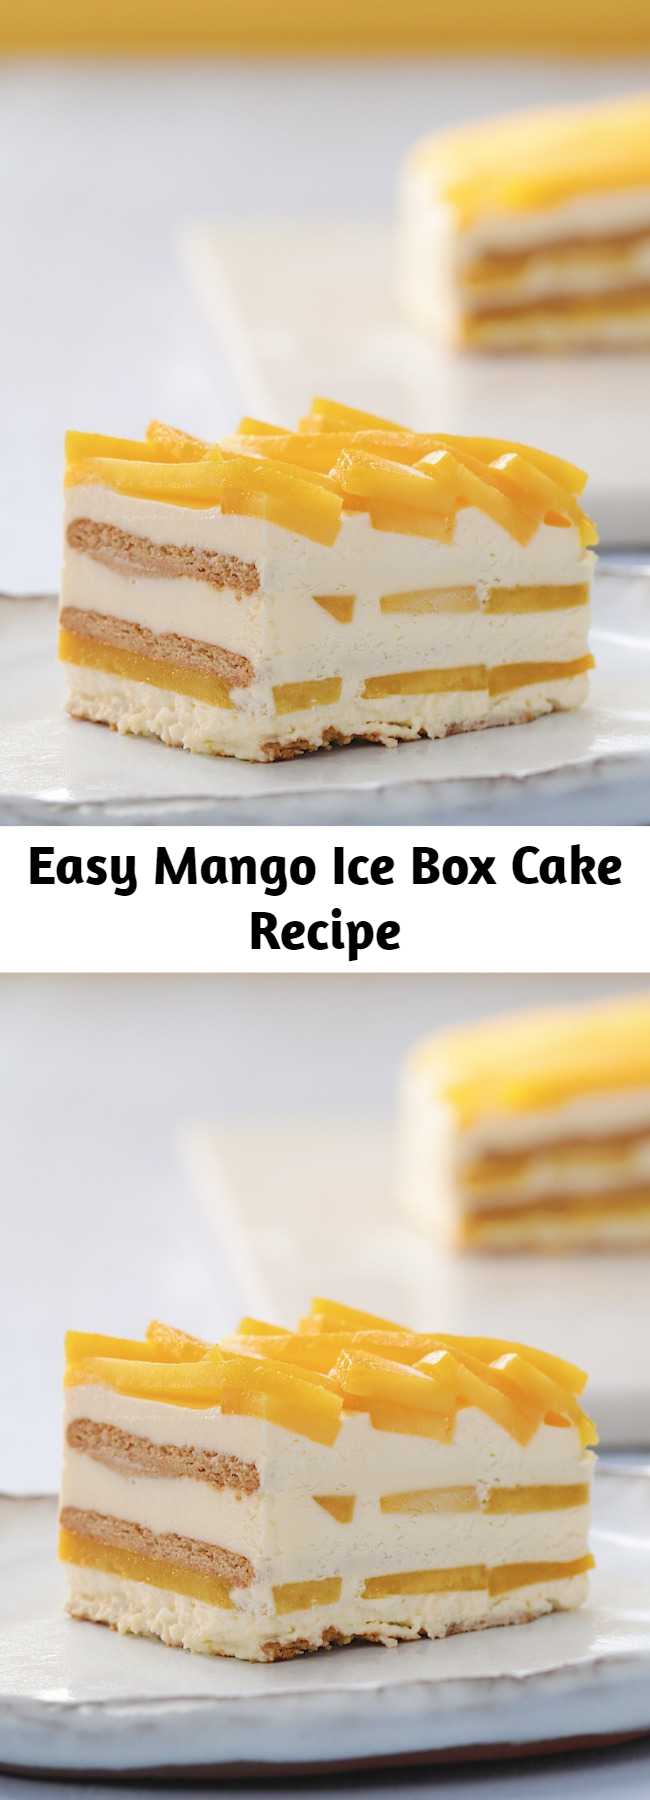 Easy Mango Ice Box Cake Recipe - This mango icebox cake is a Summer family classic! the layers of juicy fresh mango are sure to keep you refreshed!